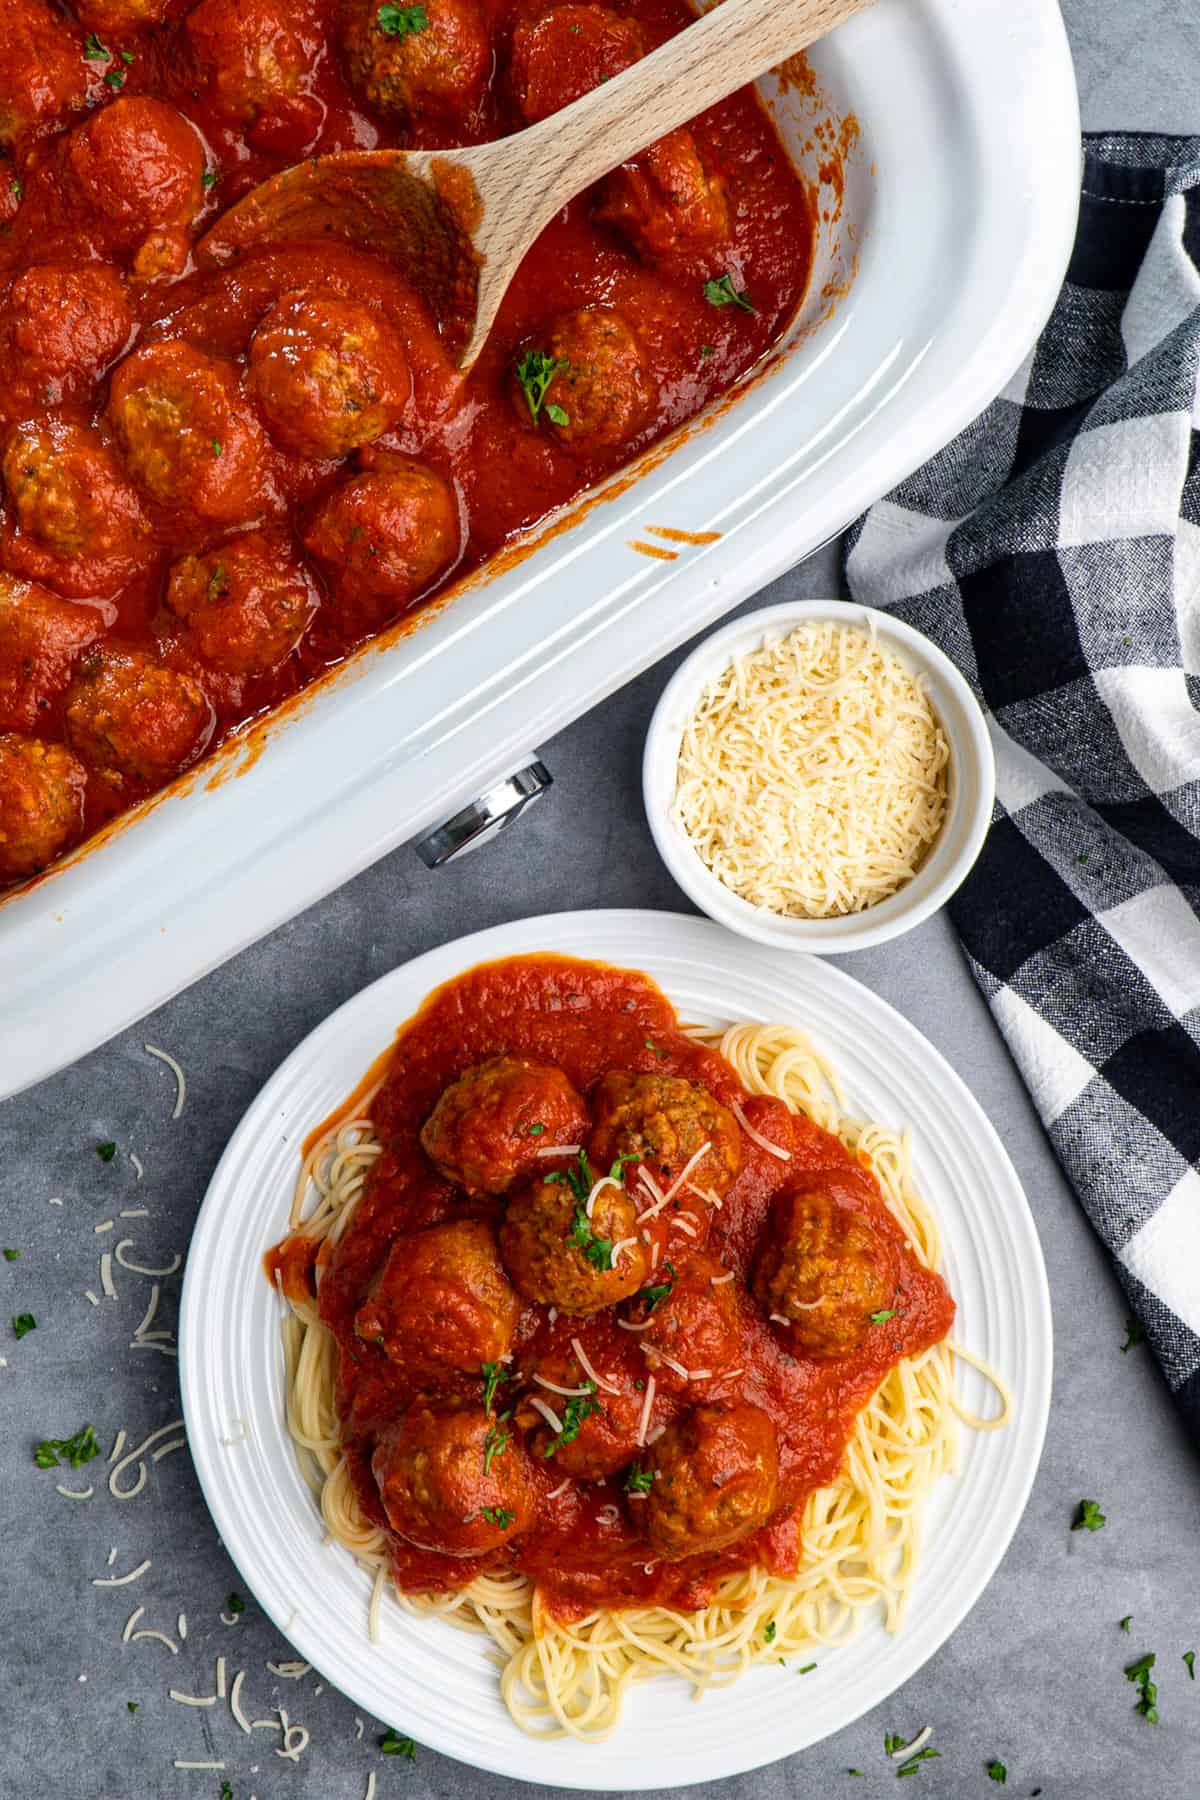 Overhead look at Crockpot meatballs over a plate of spaghetti and in a slow cooker.